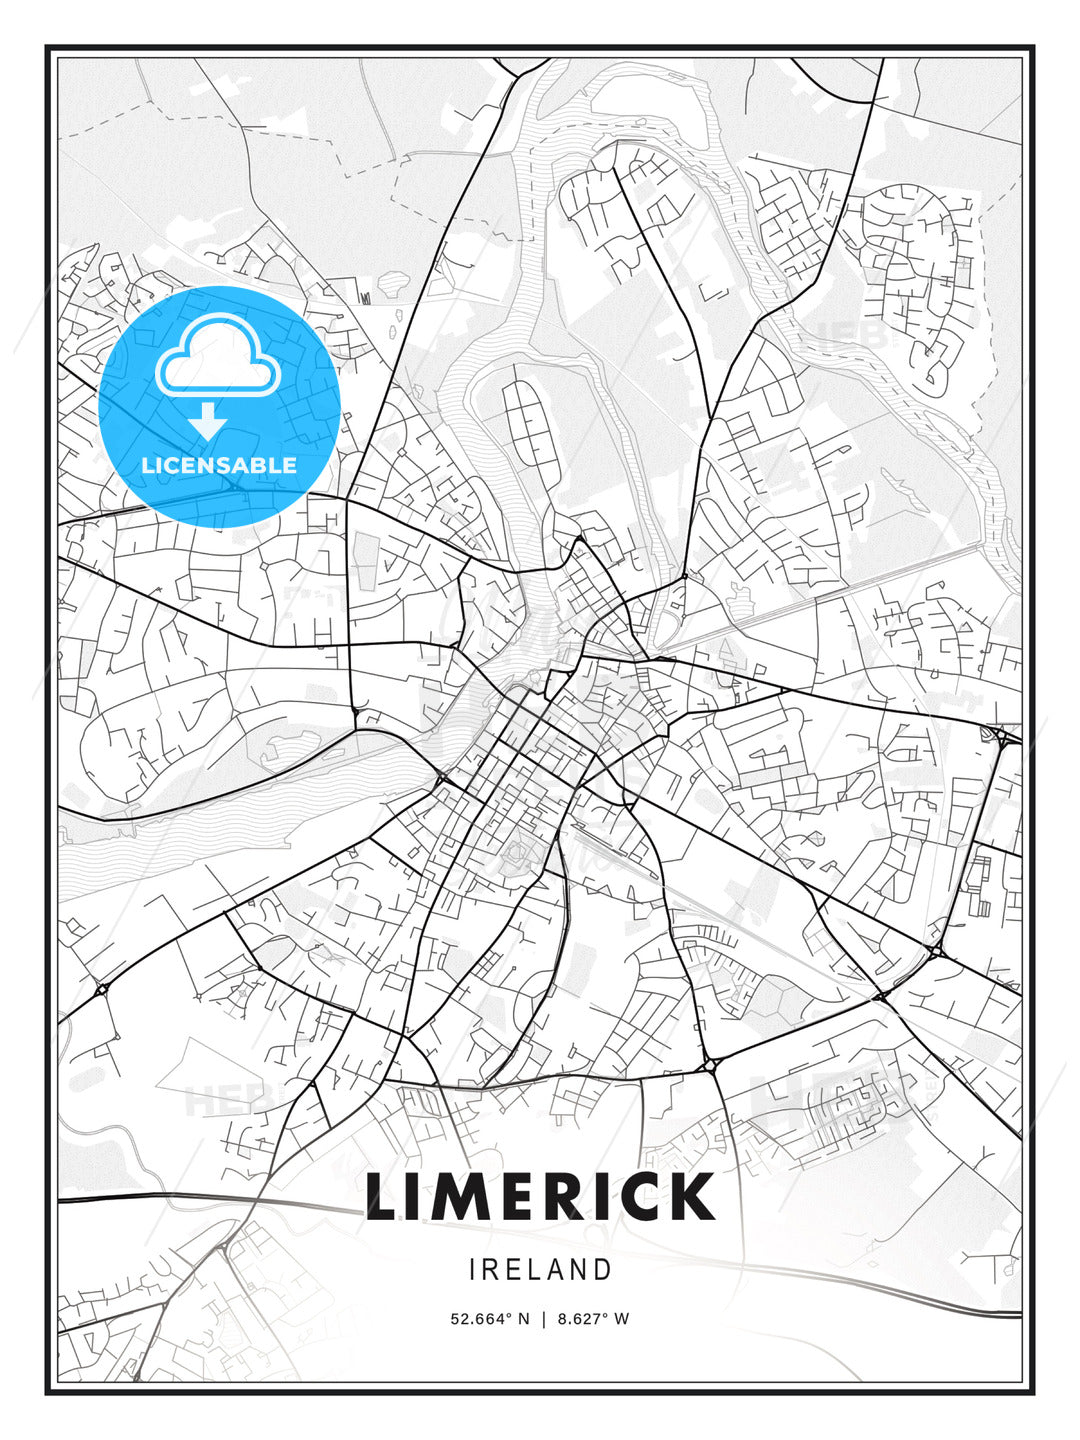 Limerick, Ireland, Modern Print Template in Various Formats - HEBSTREITS Sketches